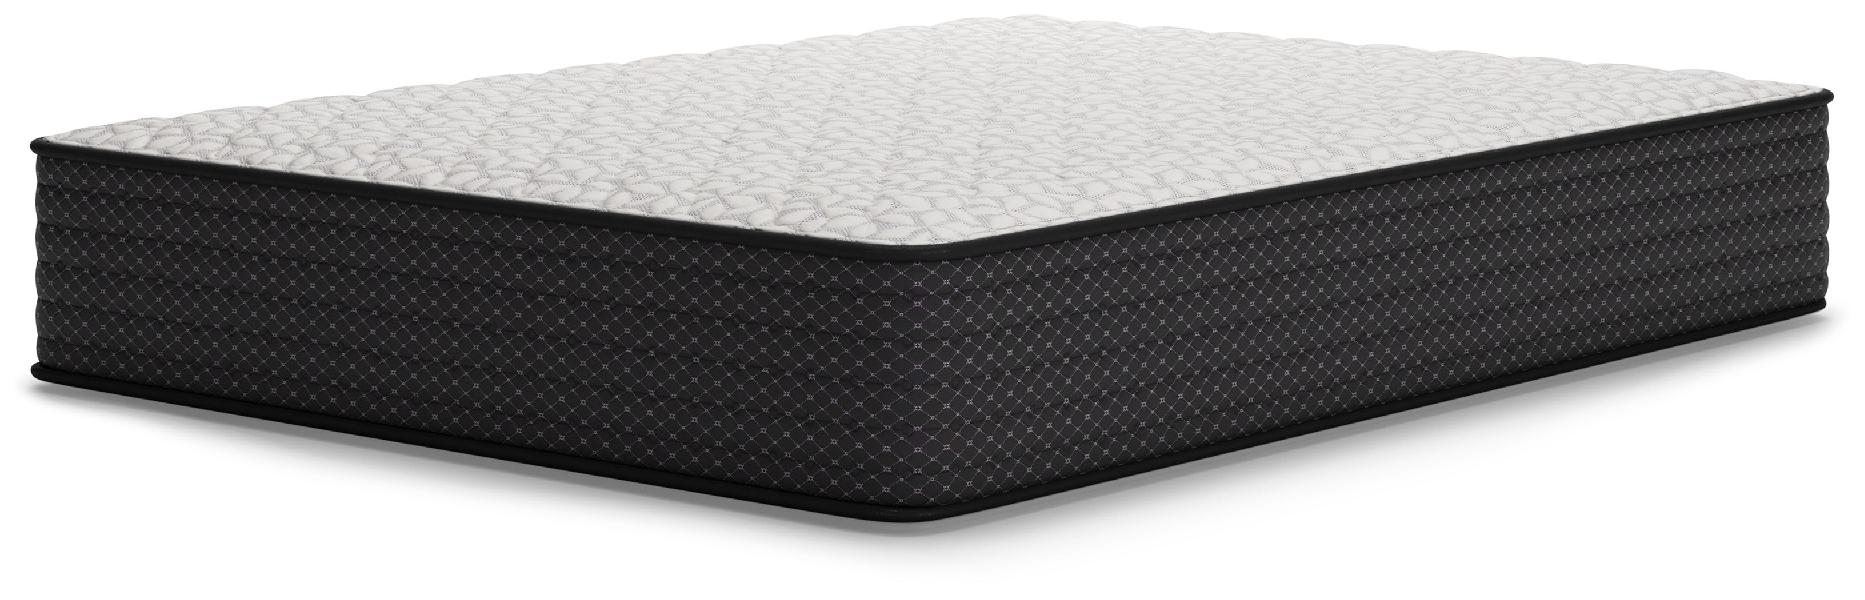 Image of Limited Edition Firm - White - Twin Mattress